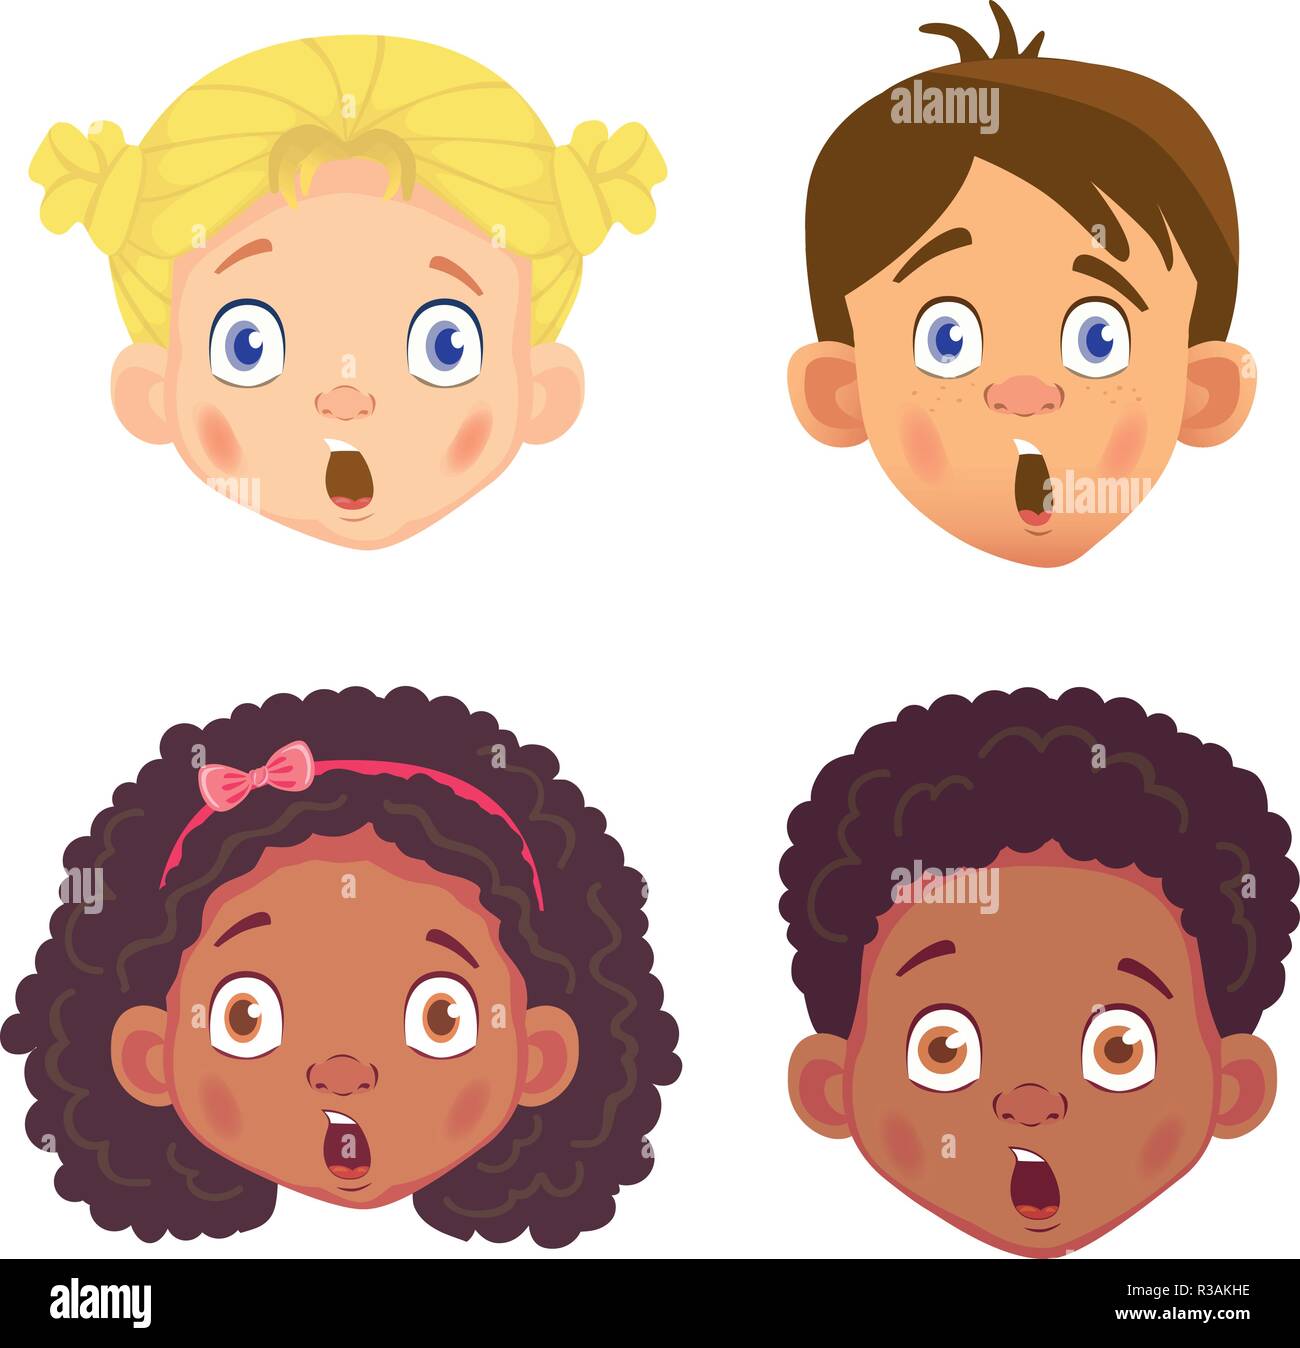 faces of girls and boys character set Stock Vector